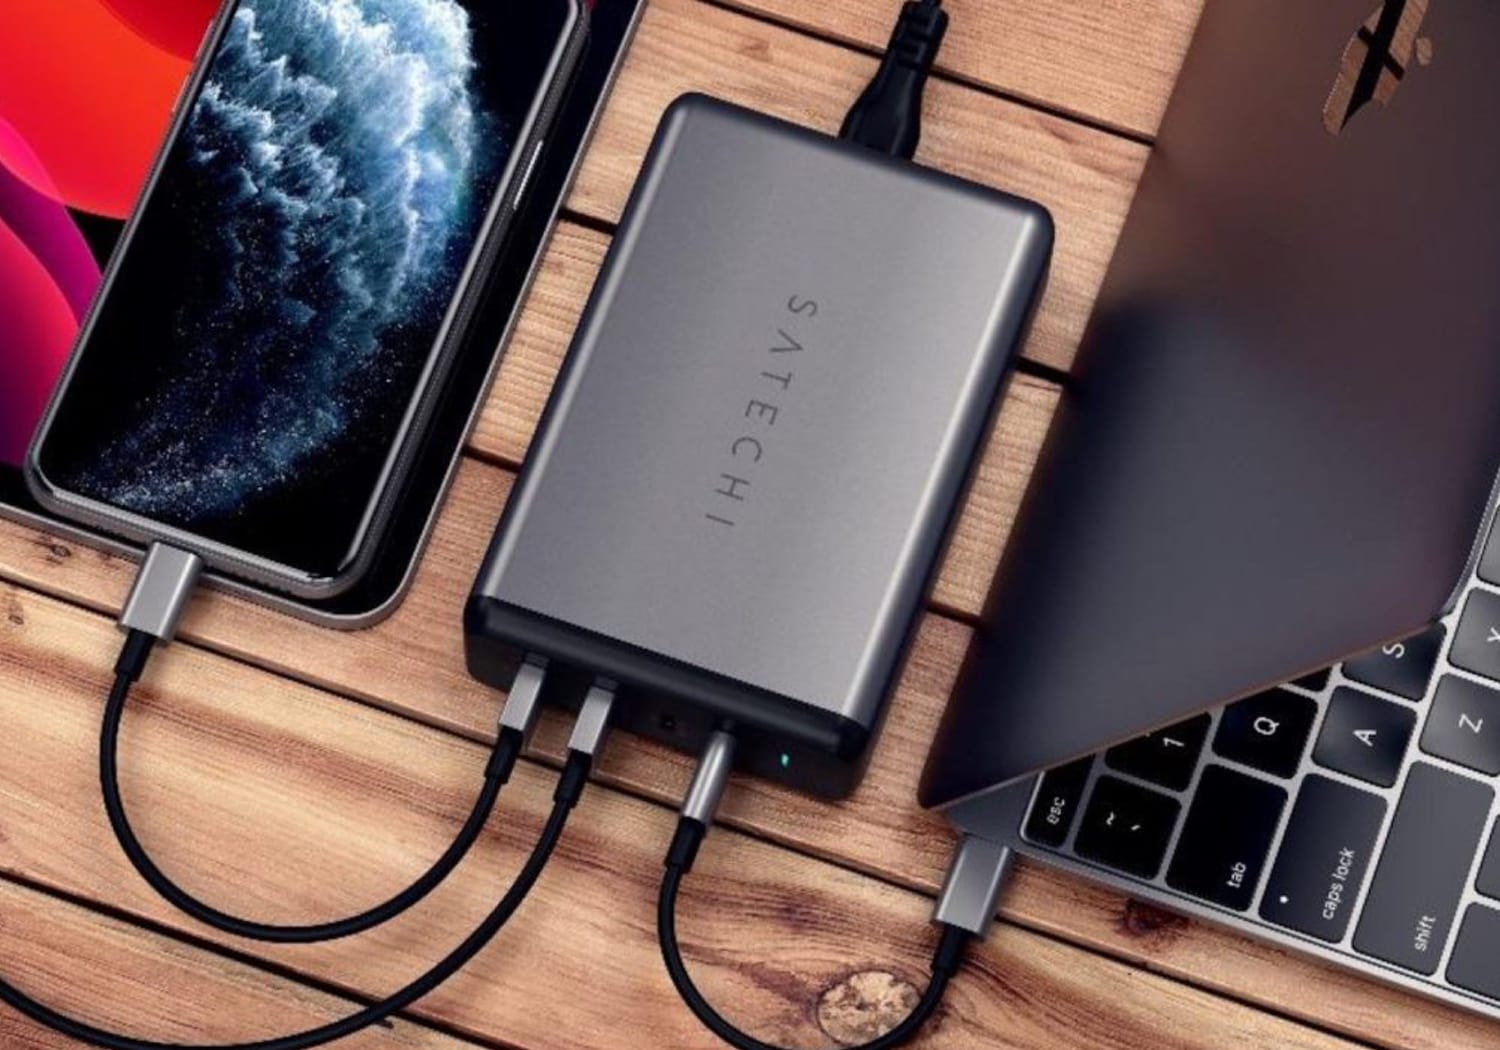 Satechi has introduced a new 108W Pro USB-C PD desktop charger